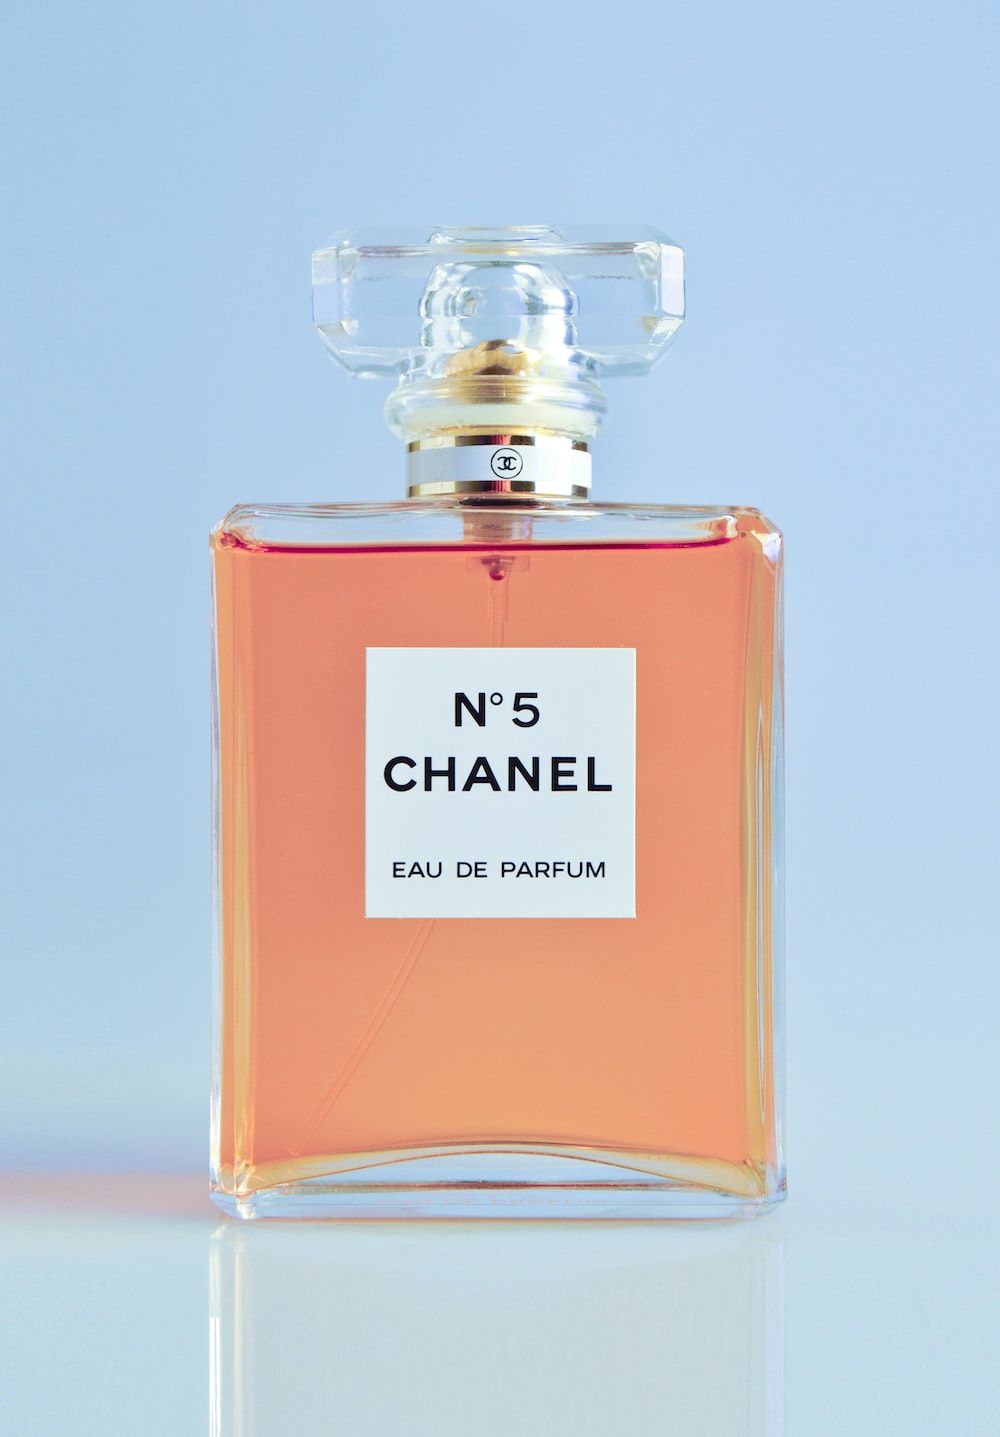 A bottle of Chanel No. 5 perfume - Chanel